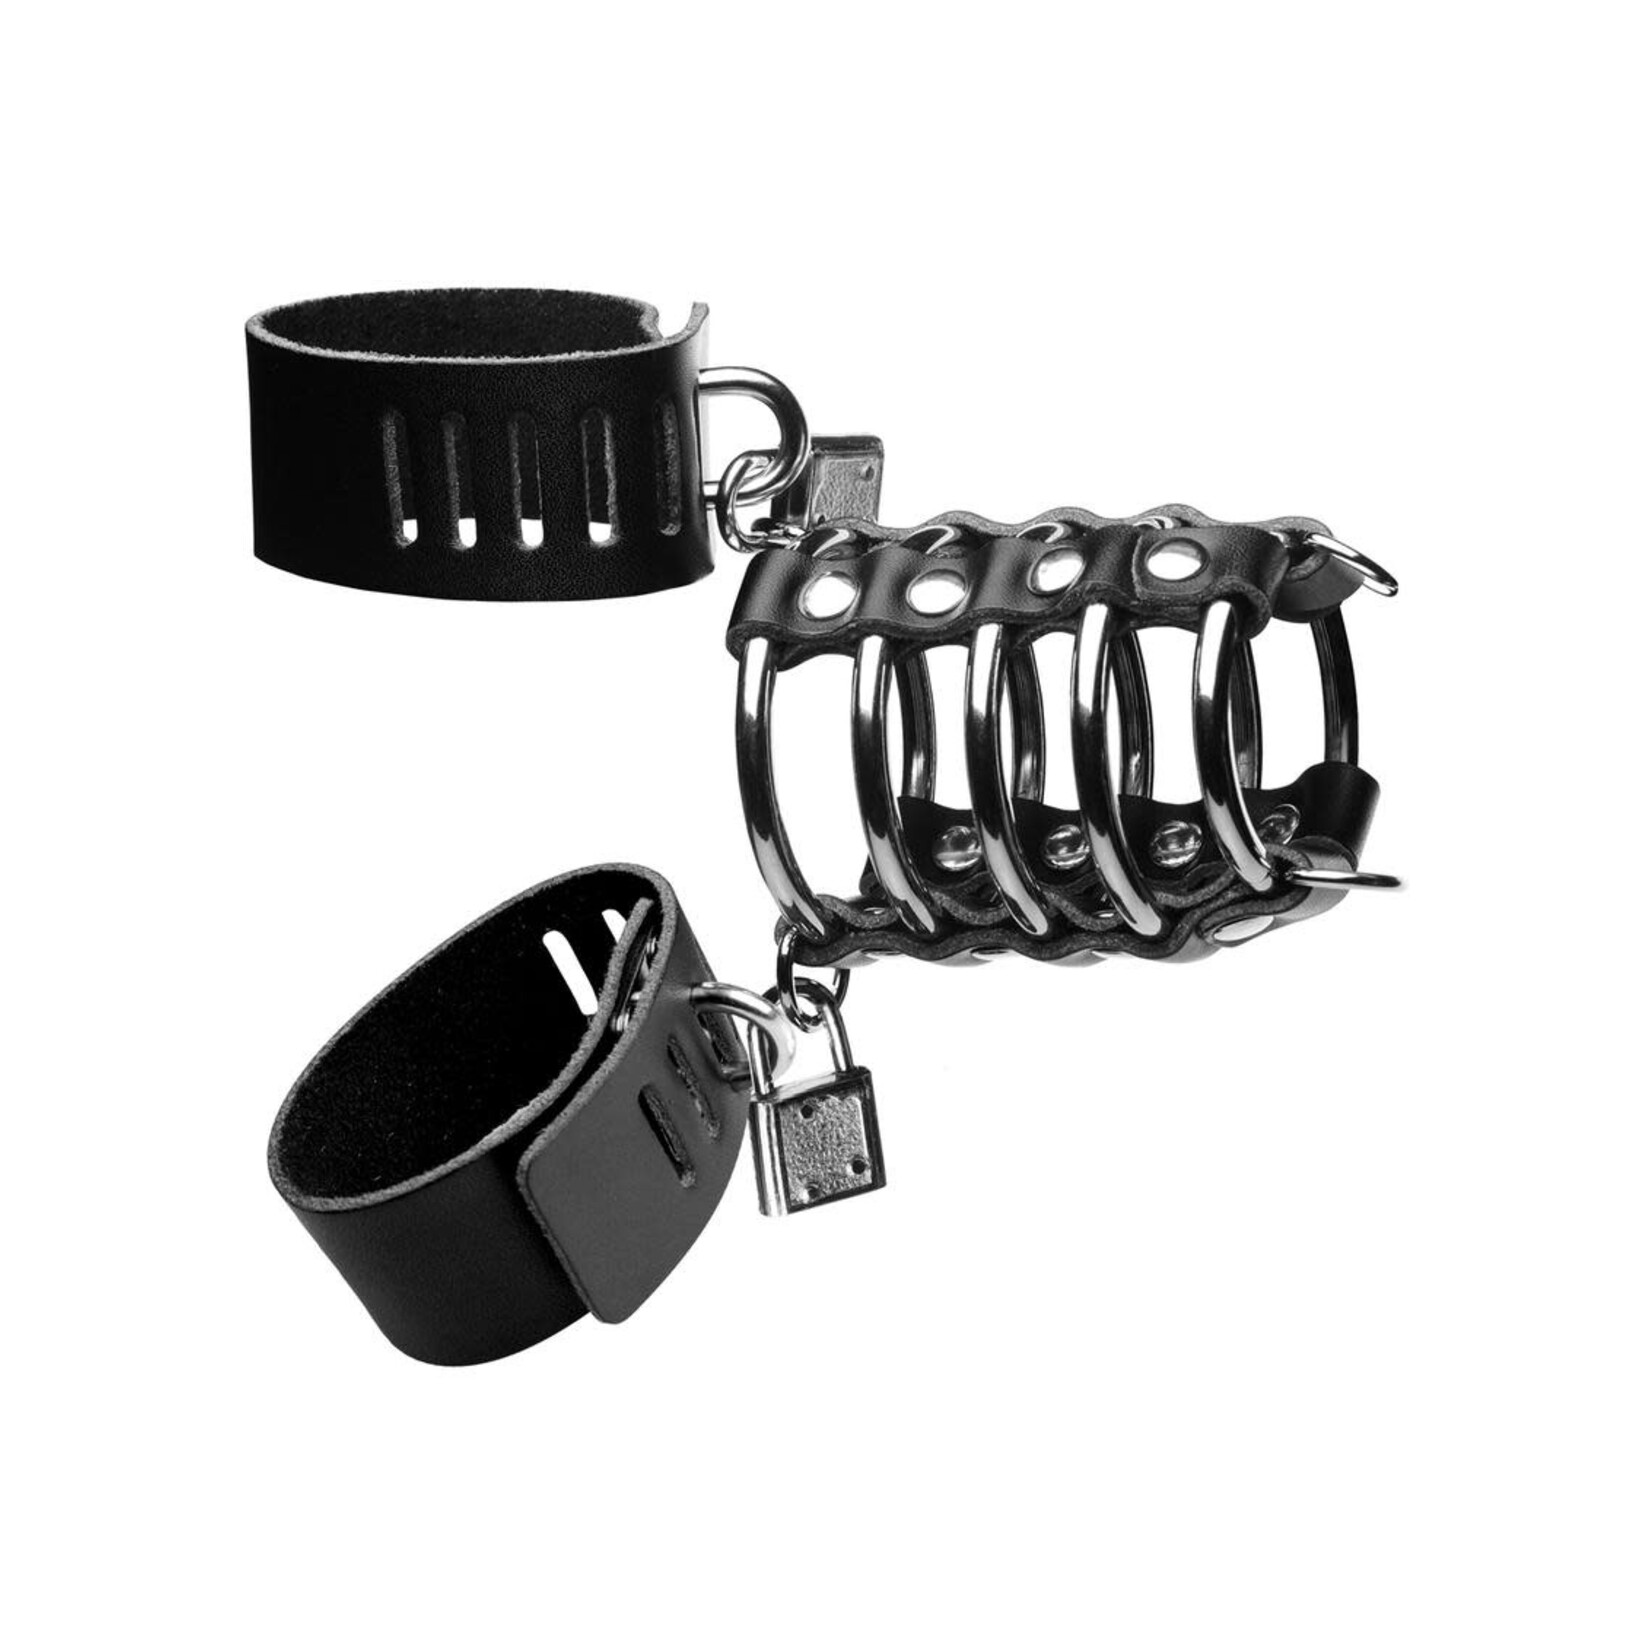 Strict Gates of Hell Chastity Device - Black